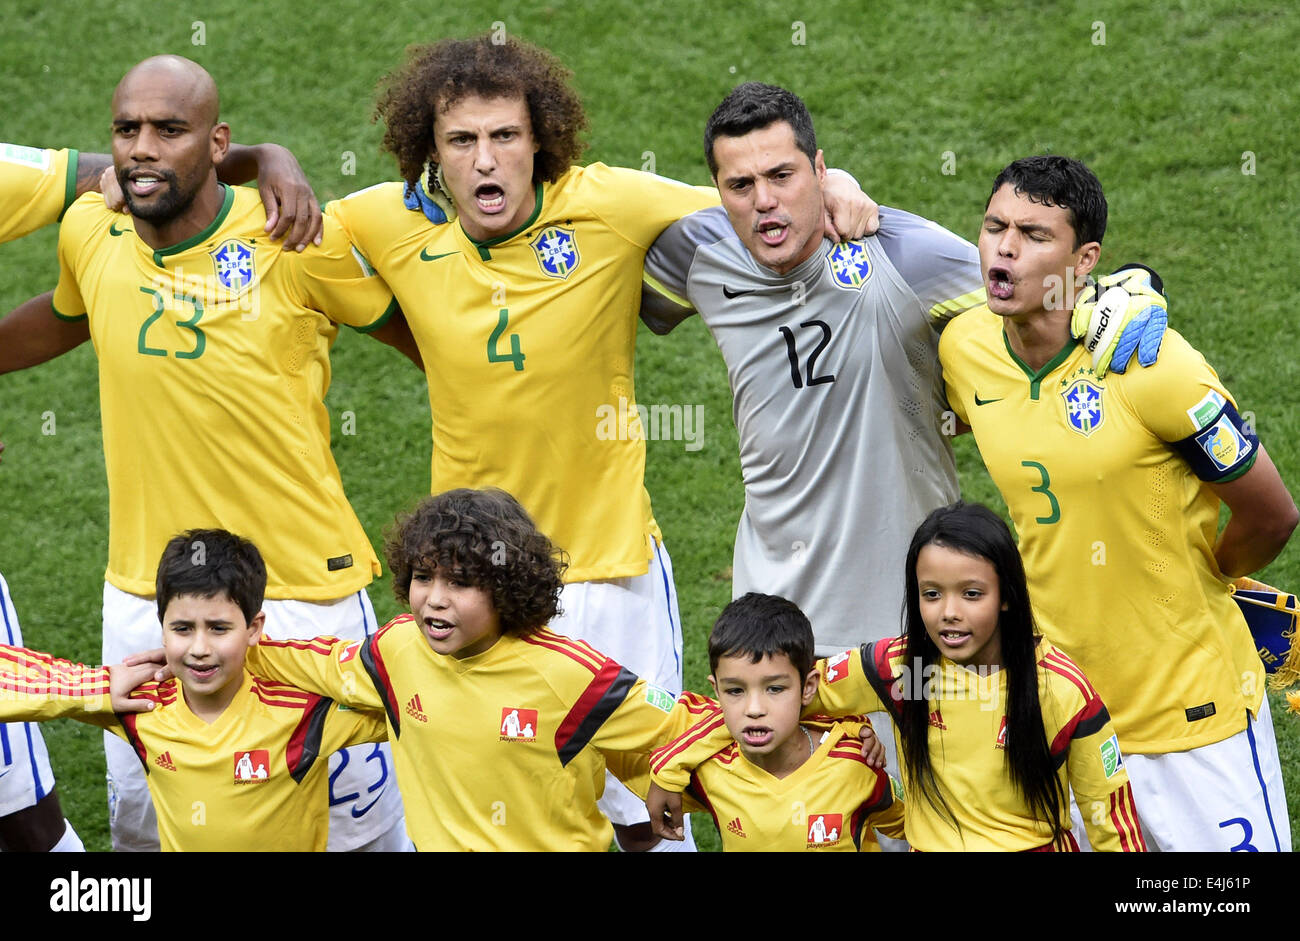 Brasilia, Brazil. 12th July, 2014. Brazil's Maicon, David Luiz, goalkeeper Julio Cesar and Thiago Silva (L to R, back) sing Brazil's national anthem before the third place play-off match between Brazil and Netherlands of 2014 FIFA World Cup at the Estadio Nacional Stadium in Brasilia, Brazil, on July 12, 2014. Credit:  Lui Siu Wai/Xinhua/Alamy Live News Stock Photo